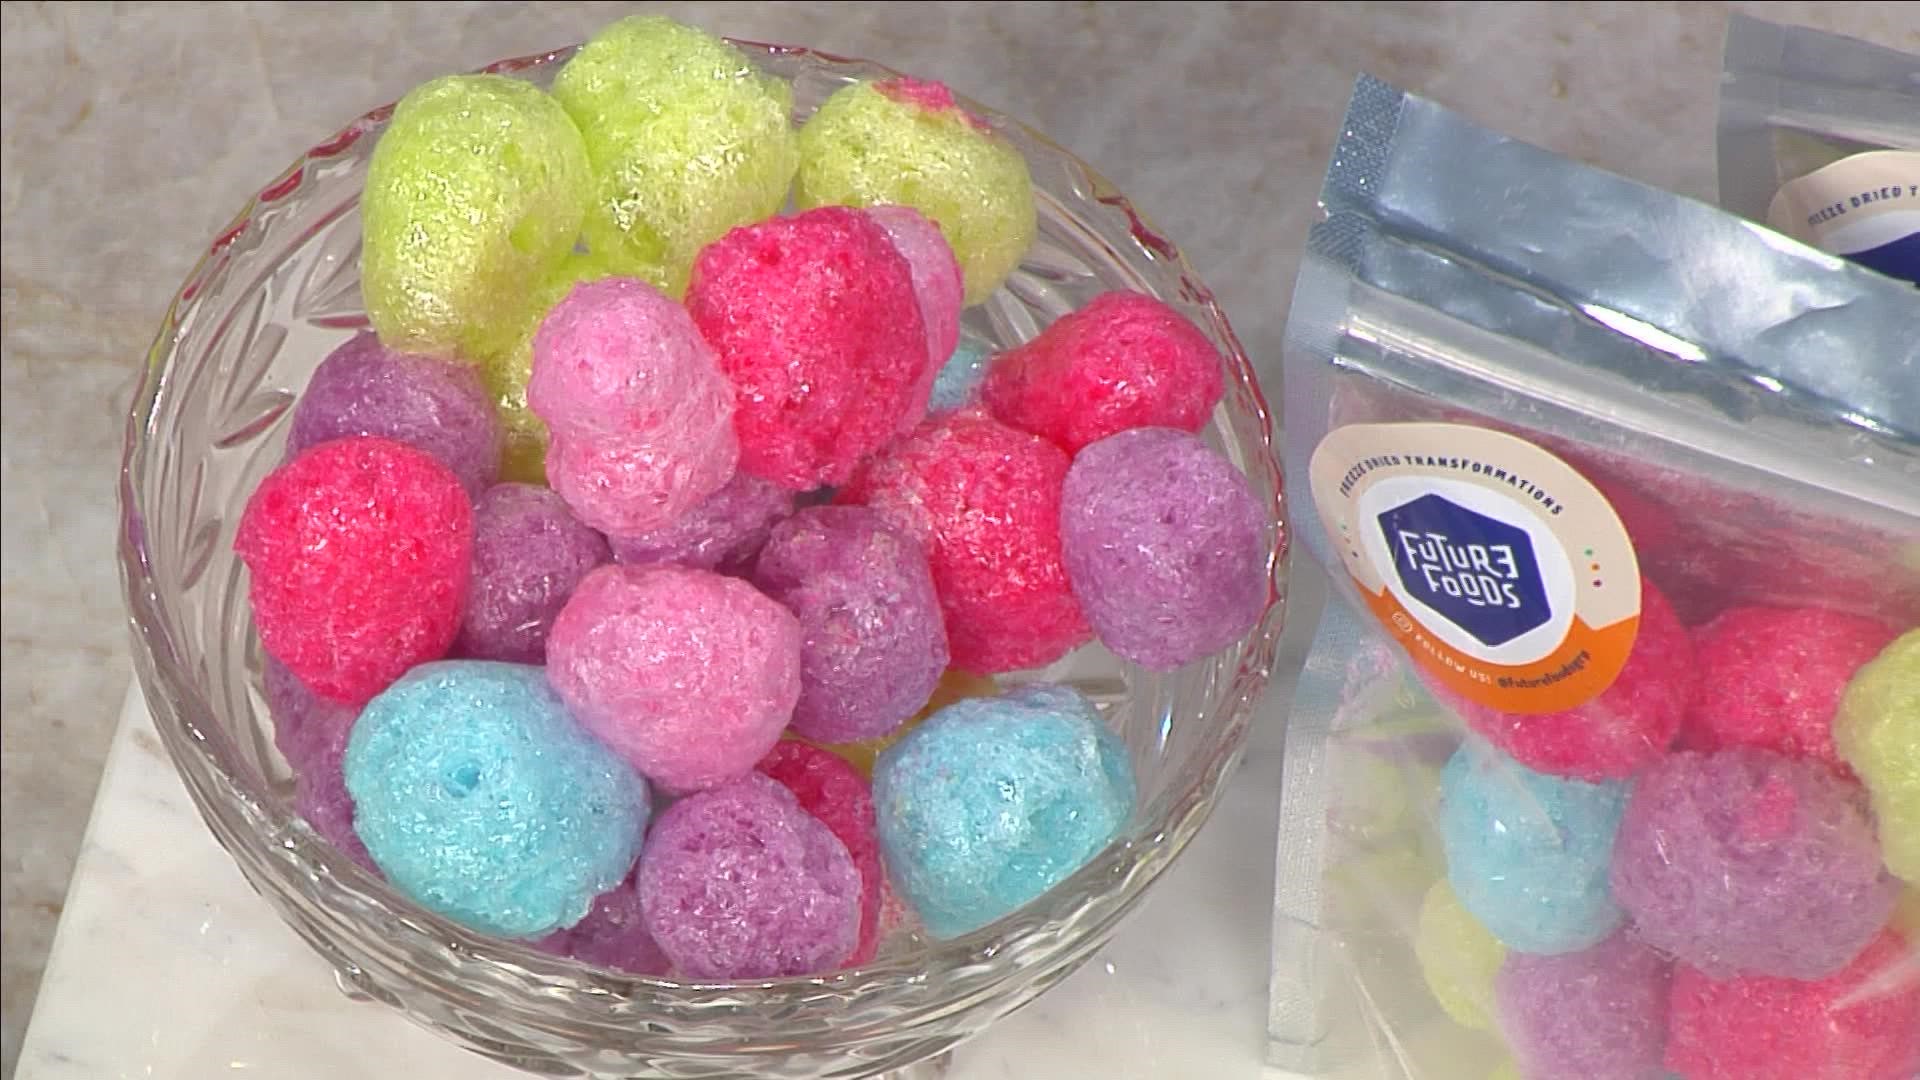 Future Foods creates tasty, freeze-dried versions of popular candies like Starbursts and Jolly Ranchers.